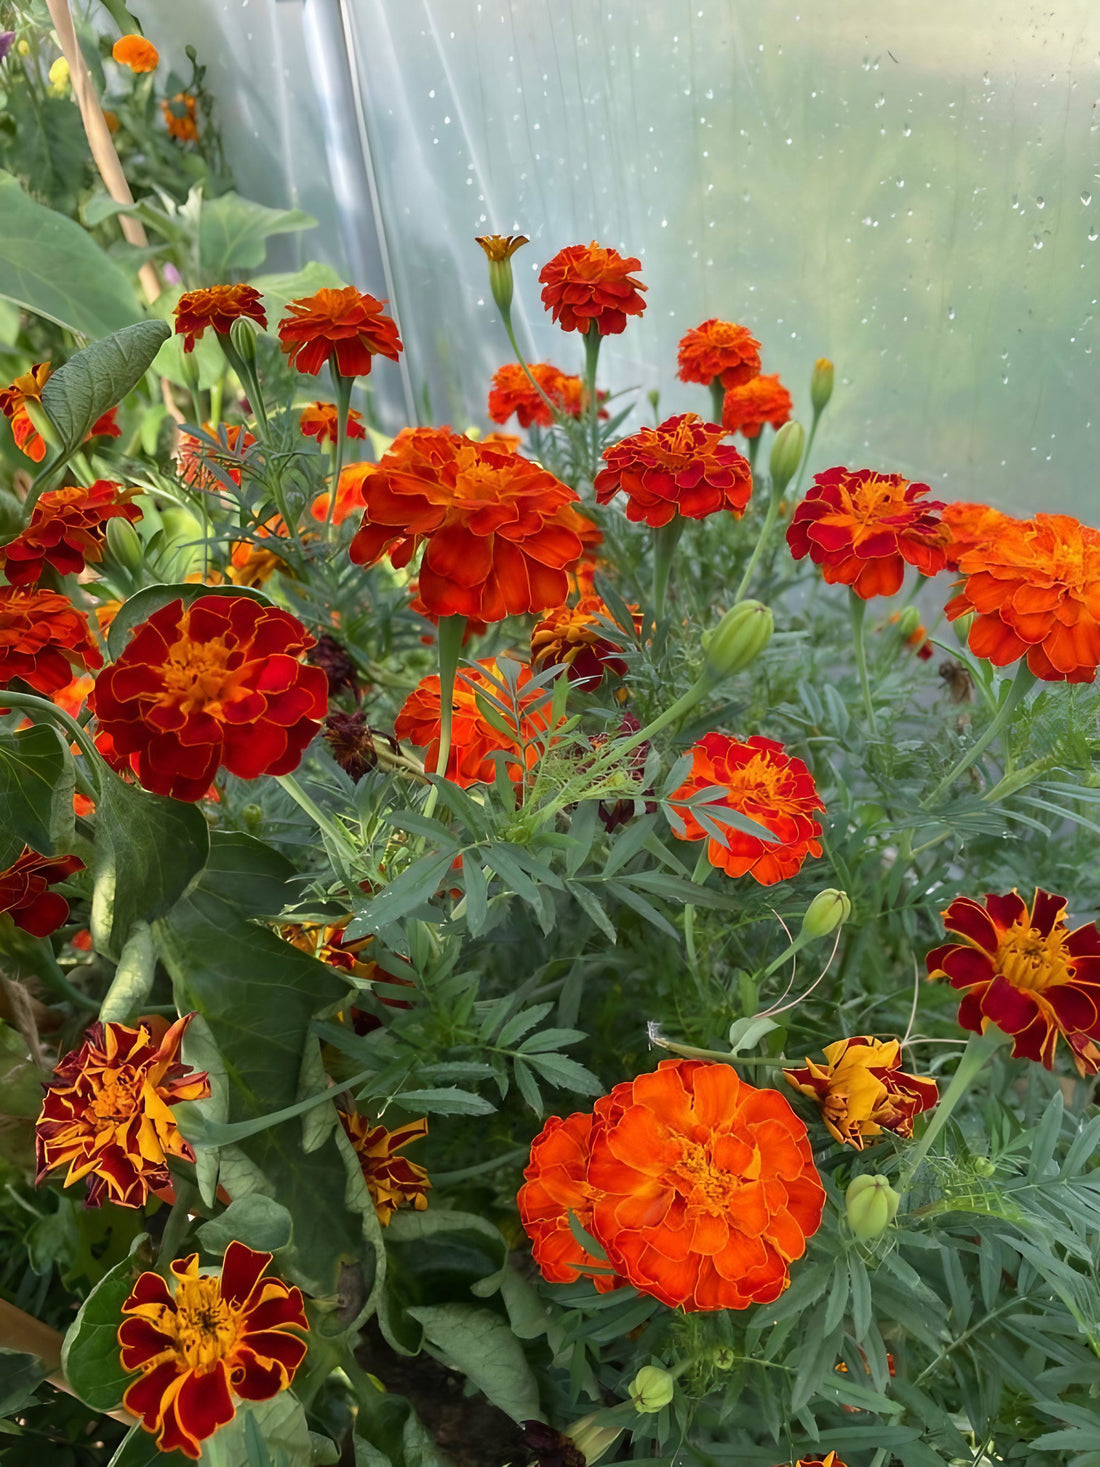 Cluster of French Marigold Red Cherry flowers blooming in a greenhouse setting